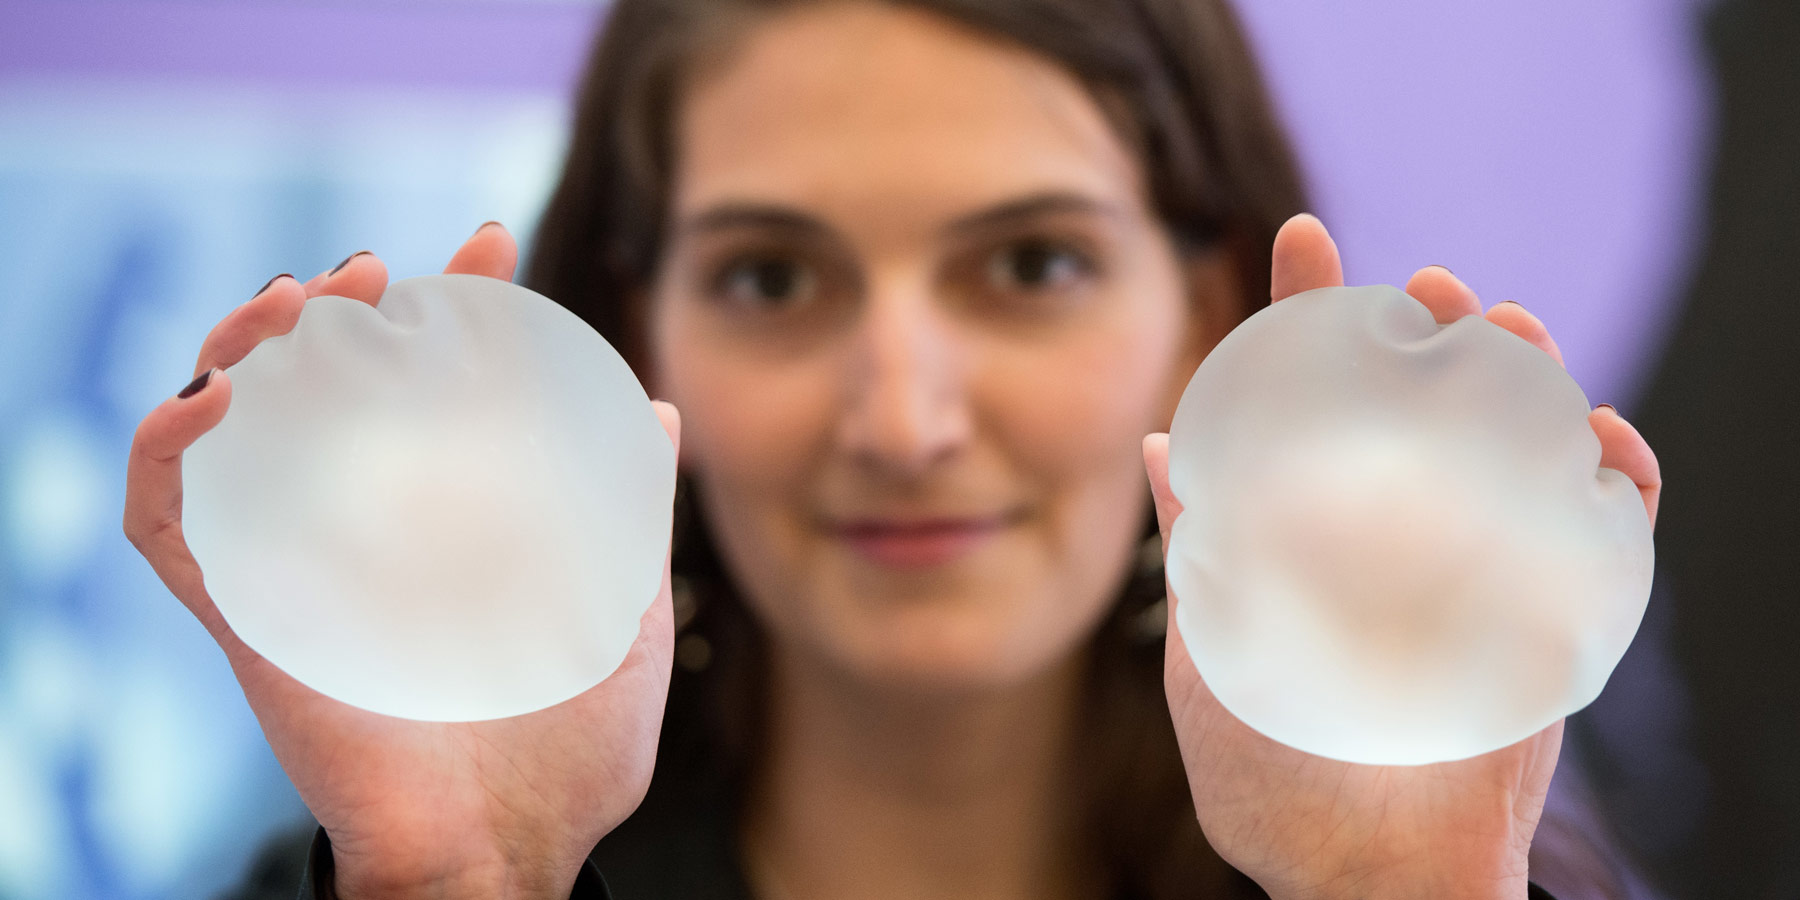 alarm tapperhed motto What are textured breast implants and are they safe? - ICIJ